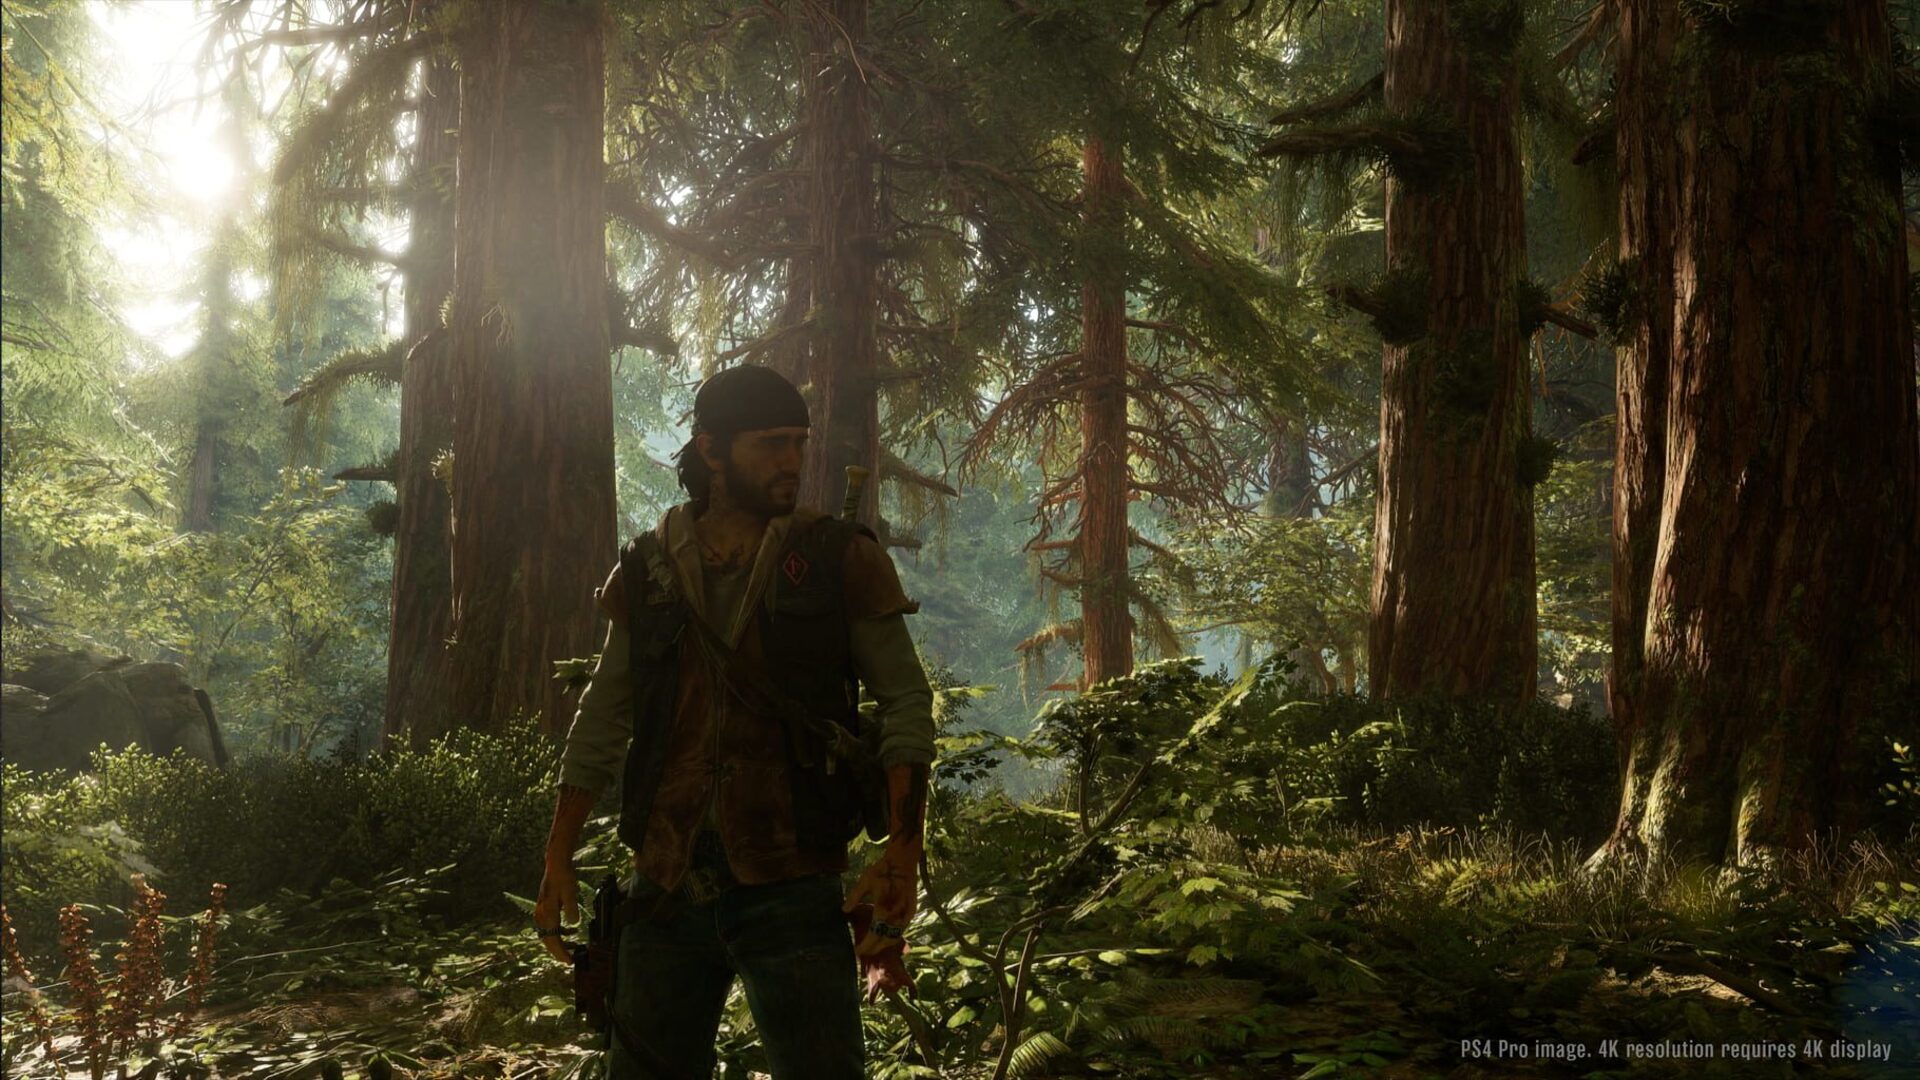 Days Gone Steam Key for PC - Buy now